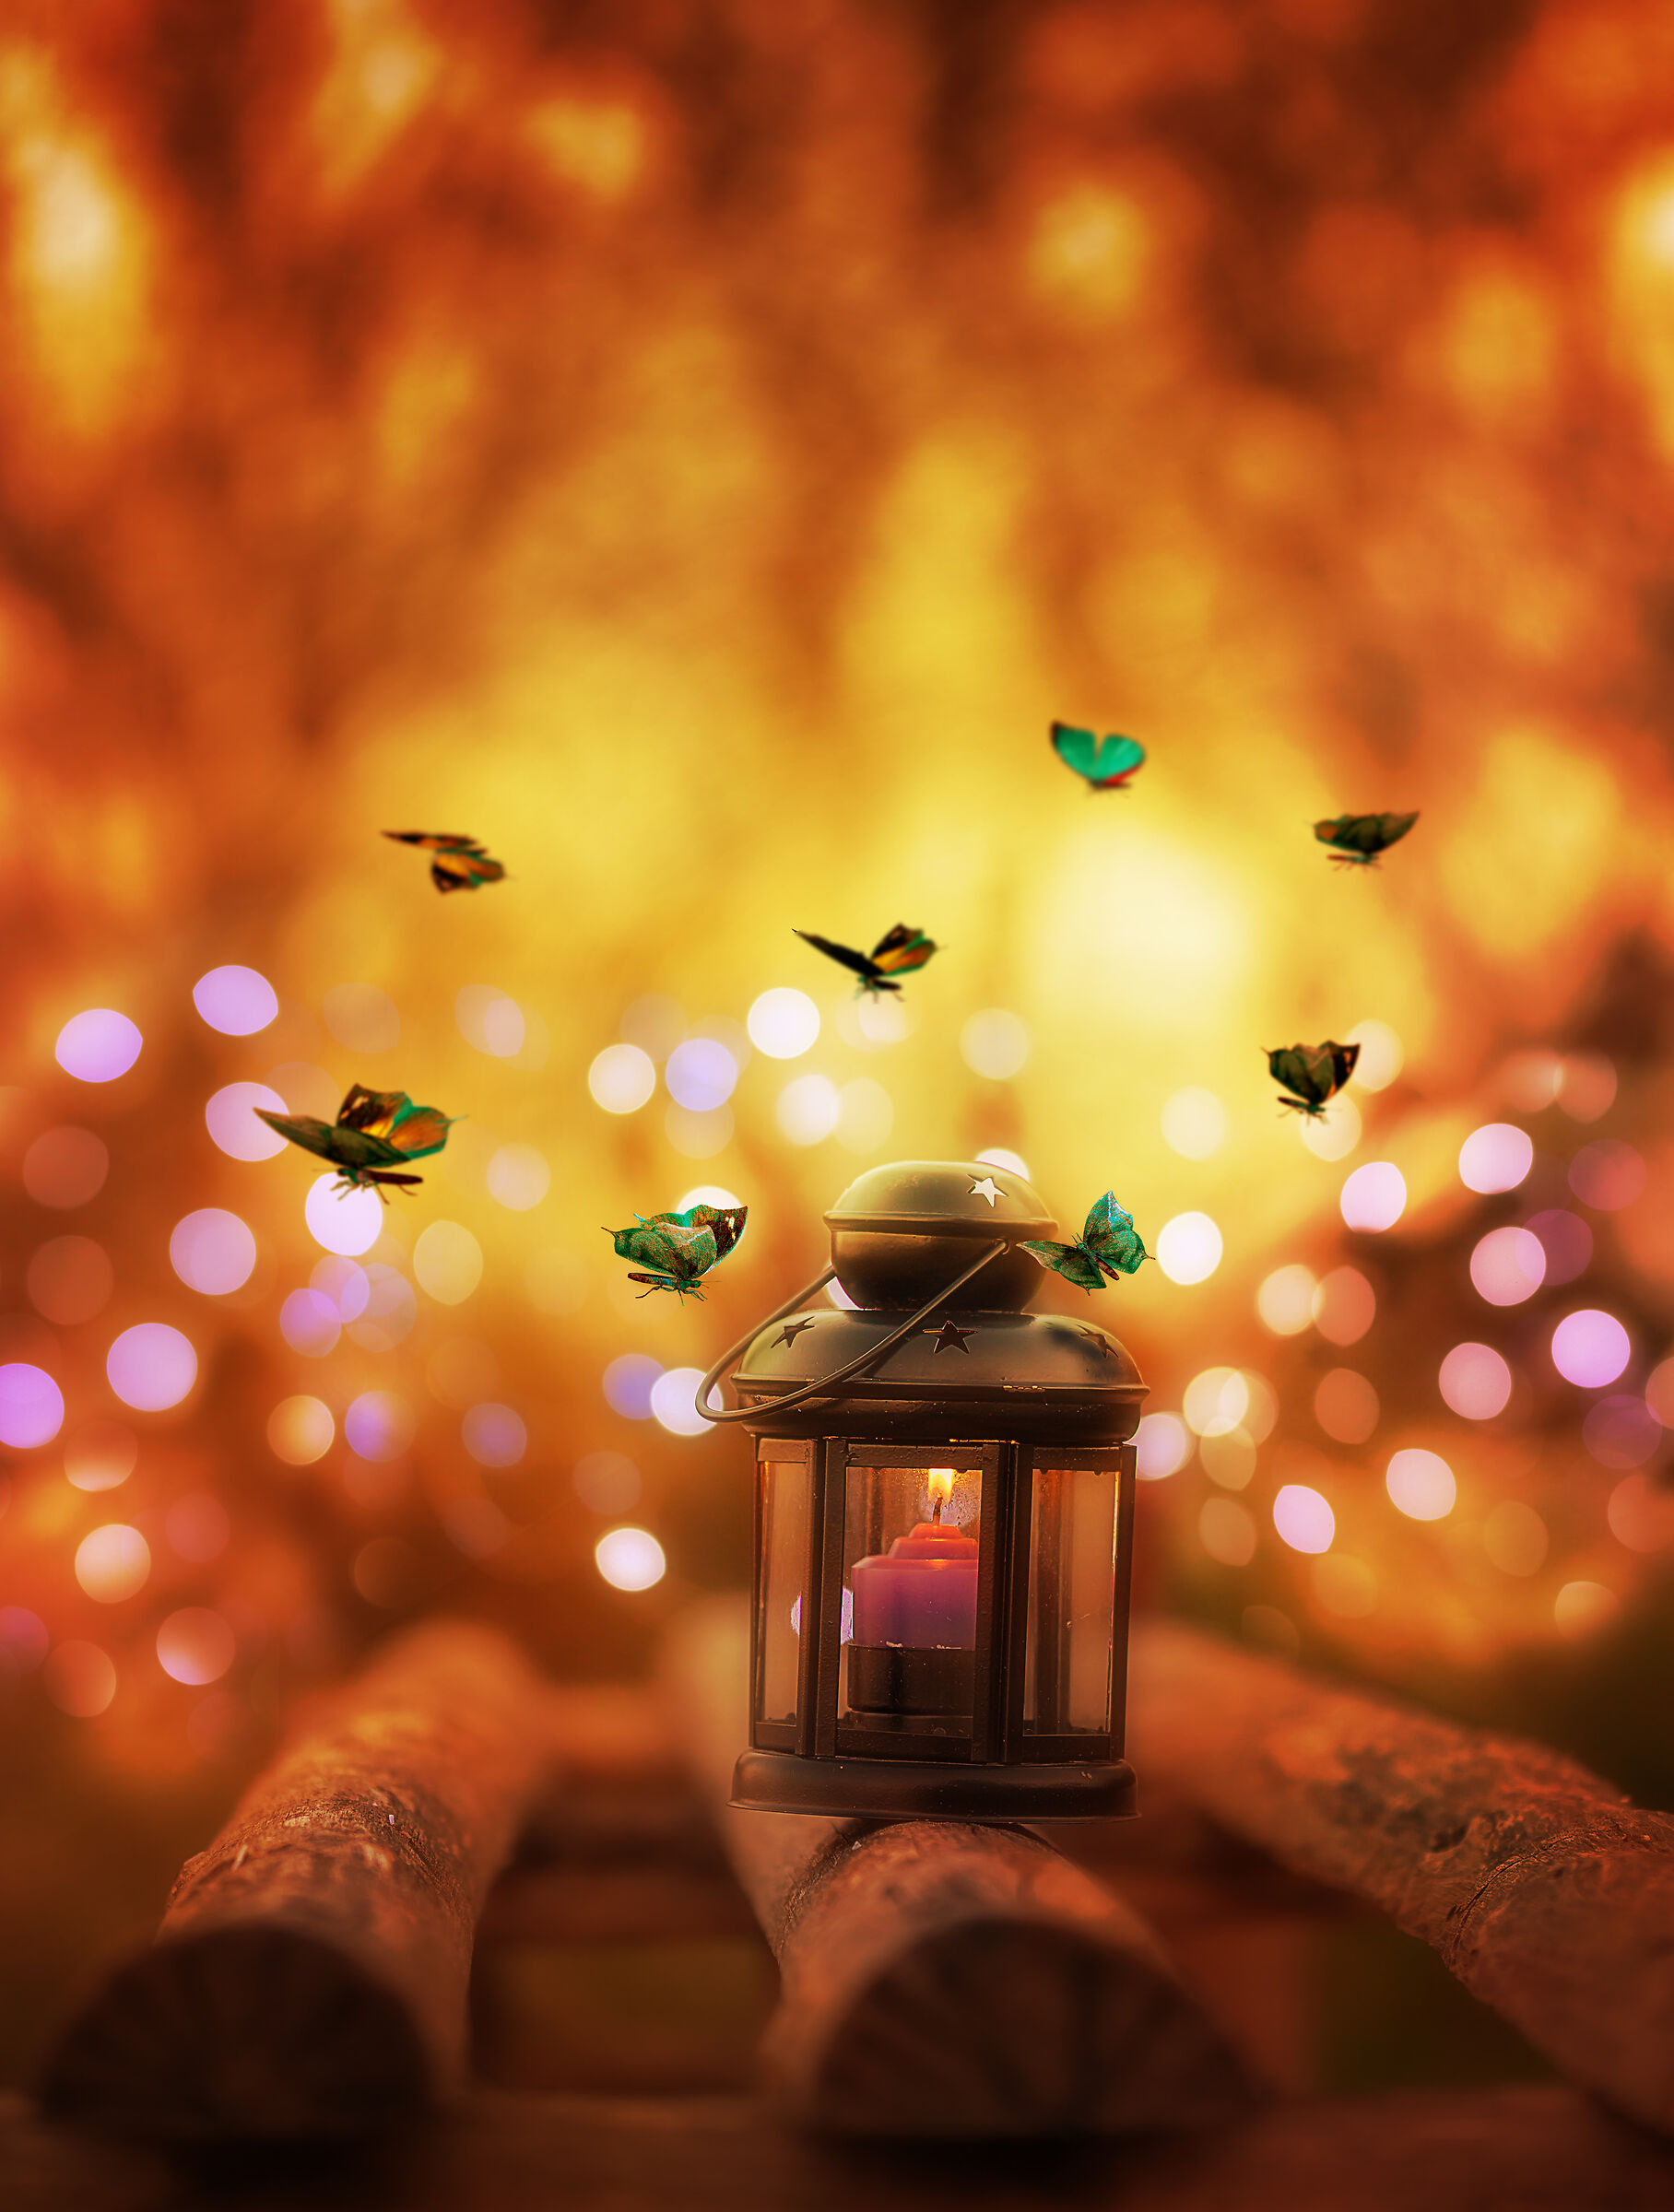 Butterflies and the lantern...